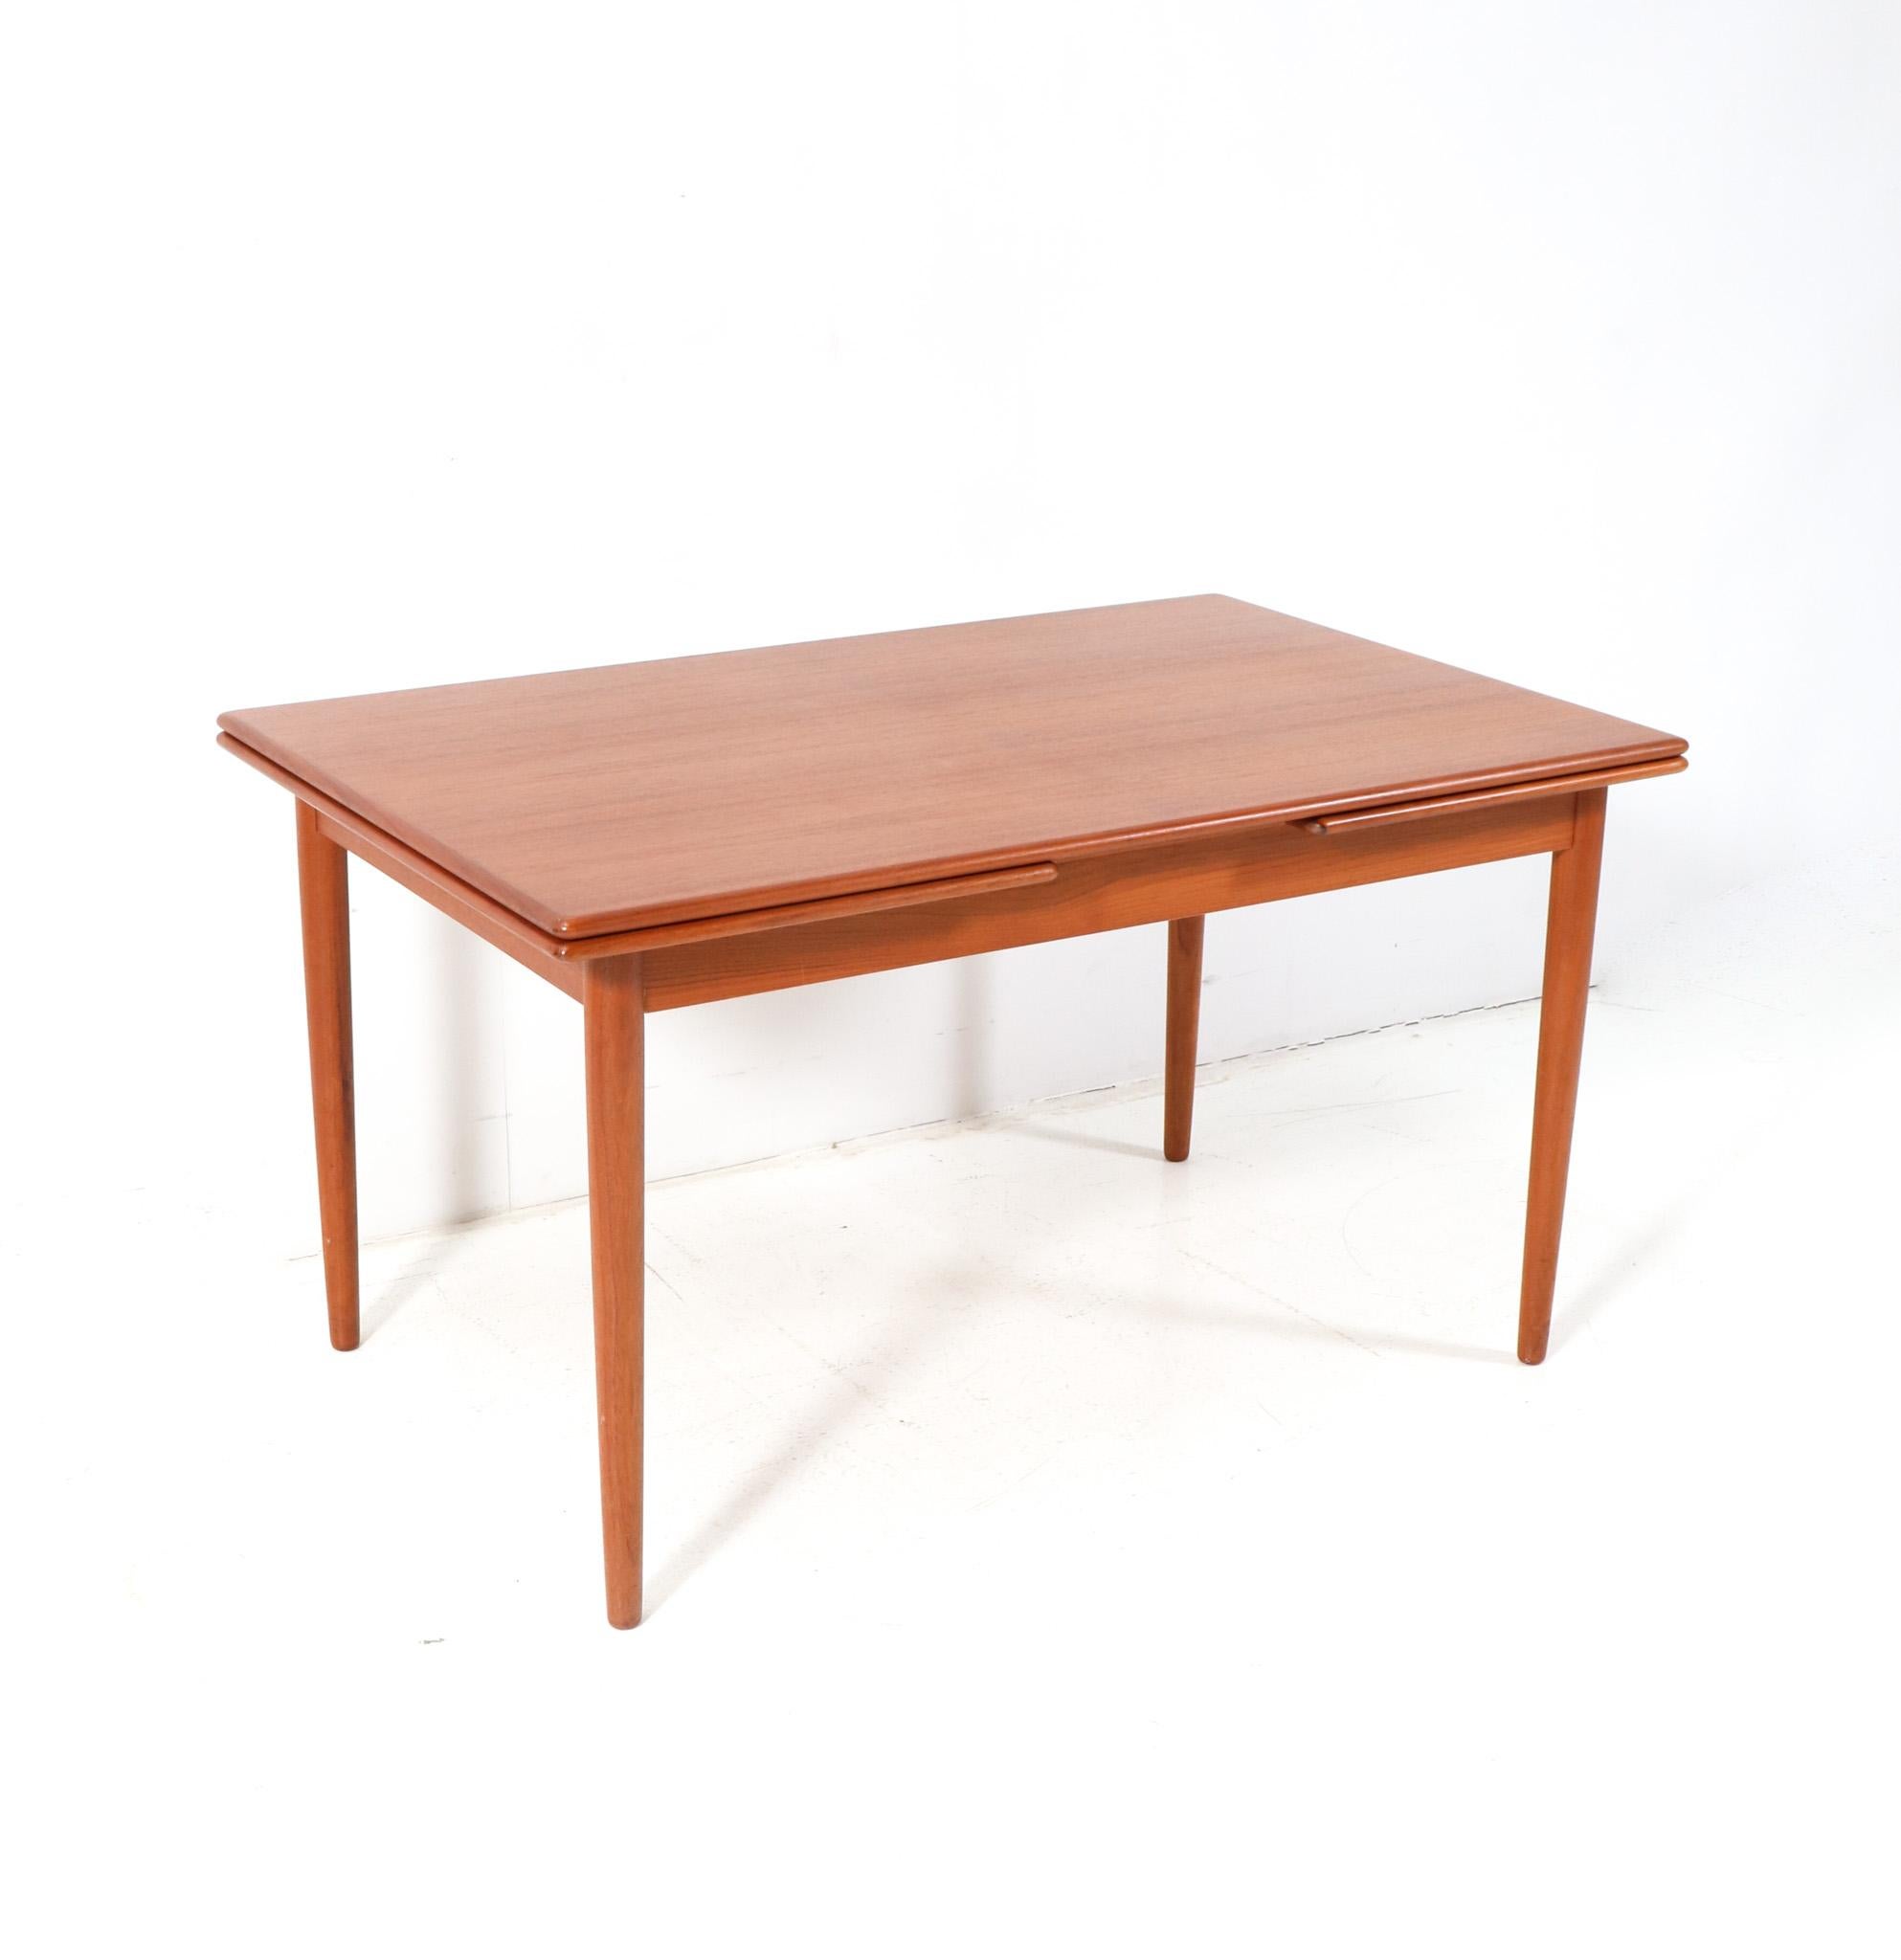 Stunning and rare Mid-Century Modern Mo. 215 extendable dining room table.
Design by Farstrup Denmark.
Striking Danish design from the 1960s.
Solid teak round tapered legs with original teak veneered top and two original teak veneered